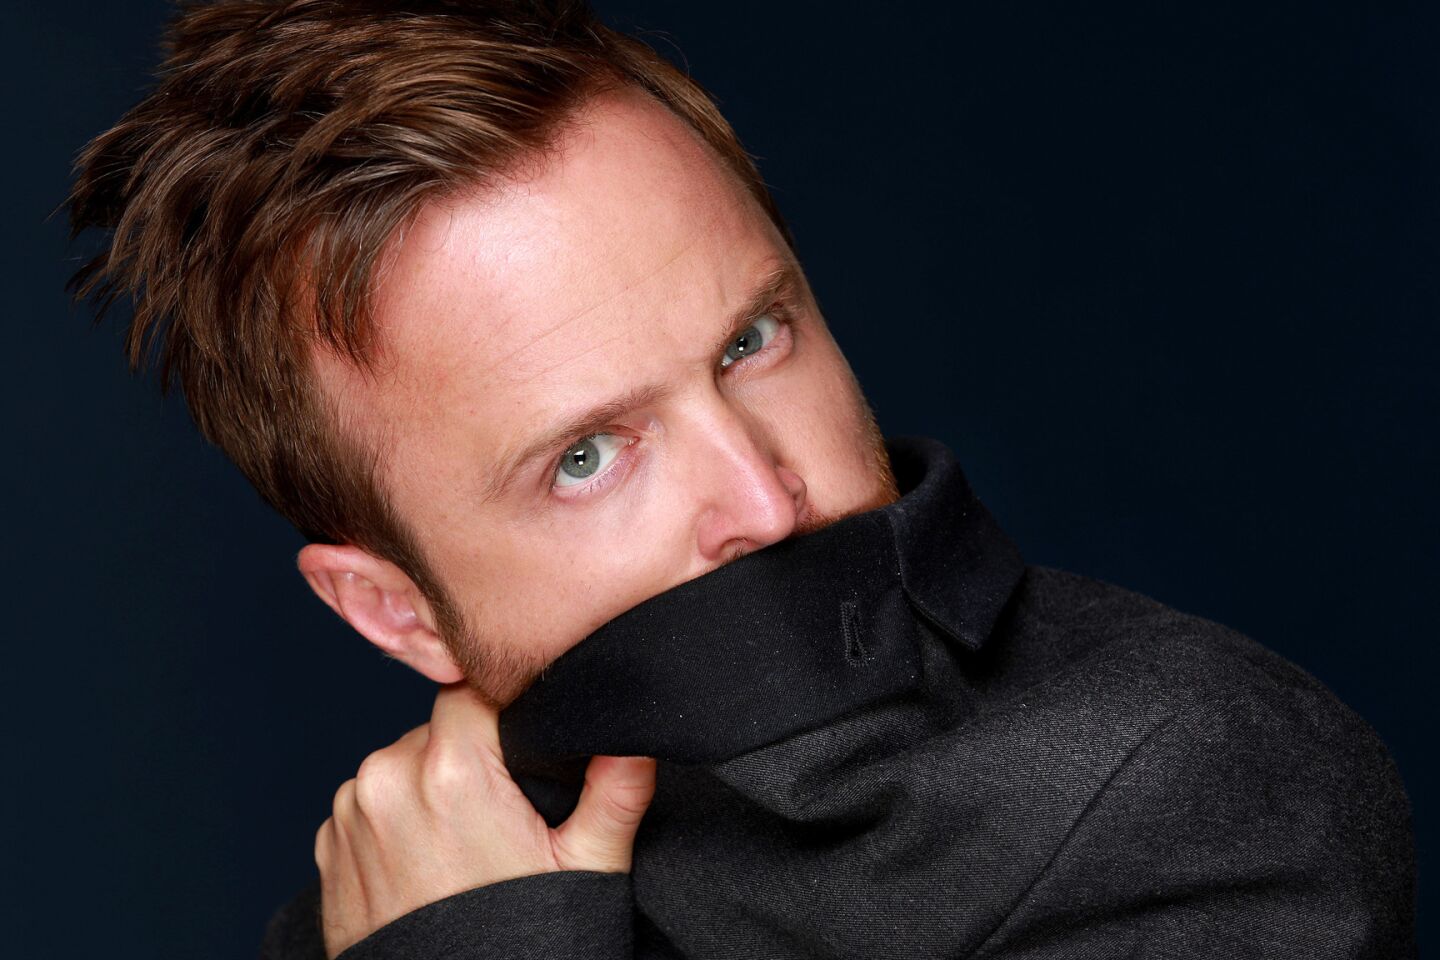 Celebrity portraits by The Times | Aaron Paul